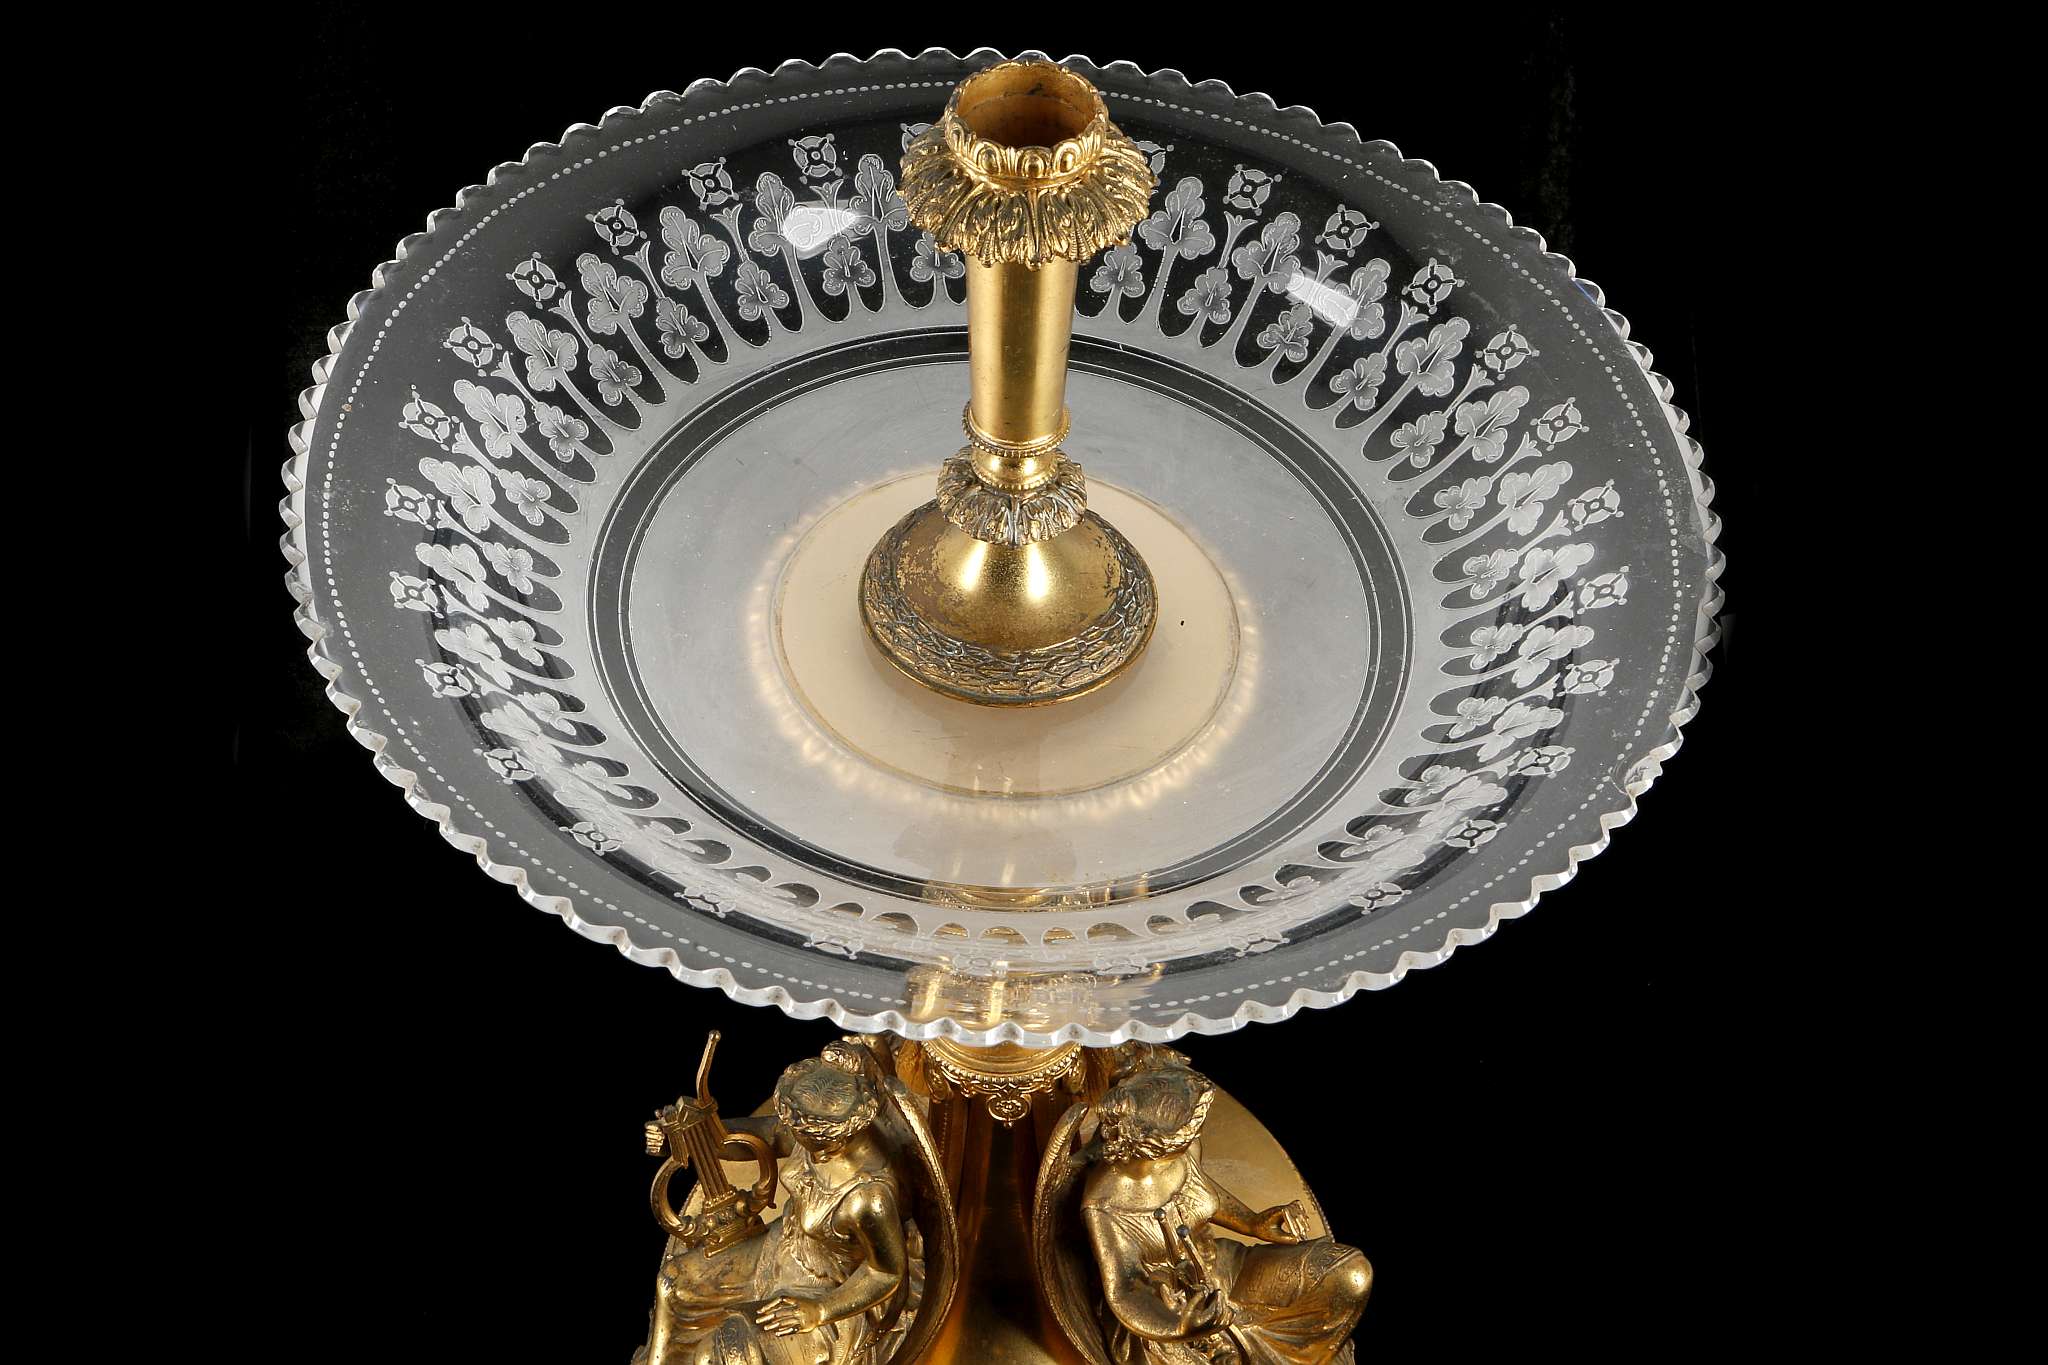 A VERY FINE GILT BRONZE AND ETCHED GLASS TABLE CENTREPIECE, late 19th century, by Horace - Image 6 of 6